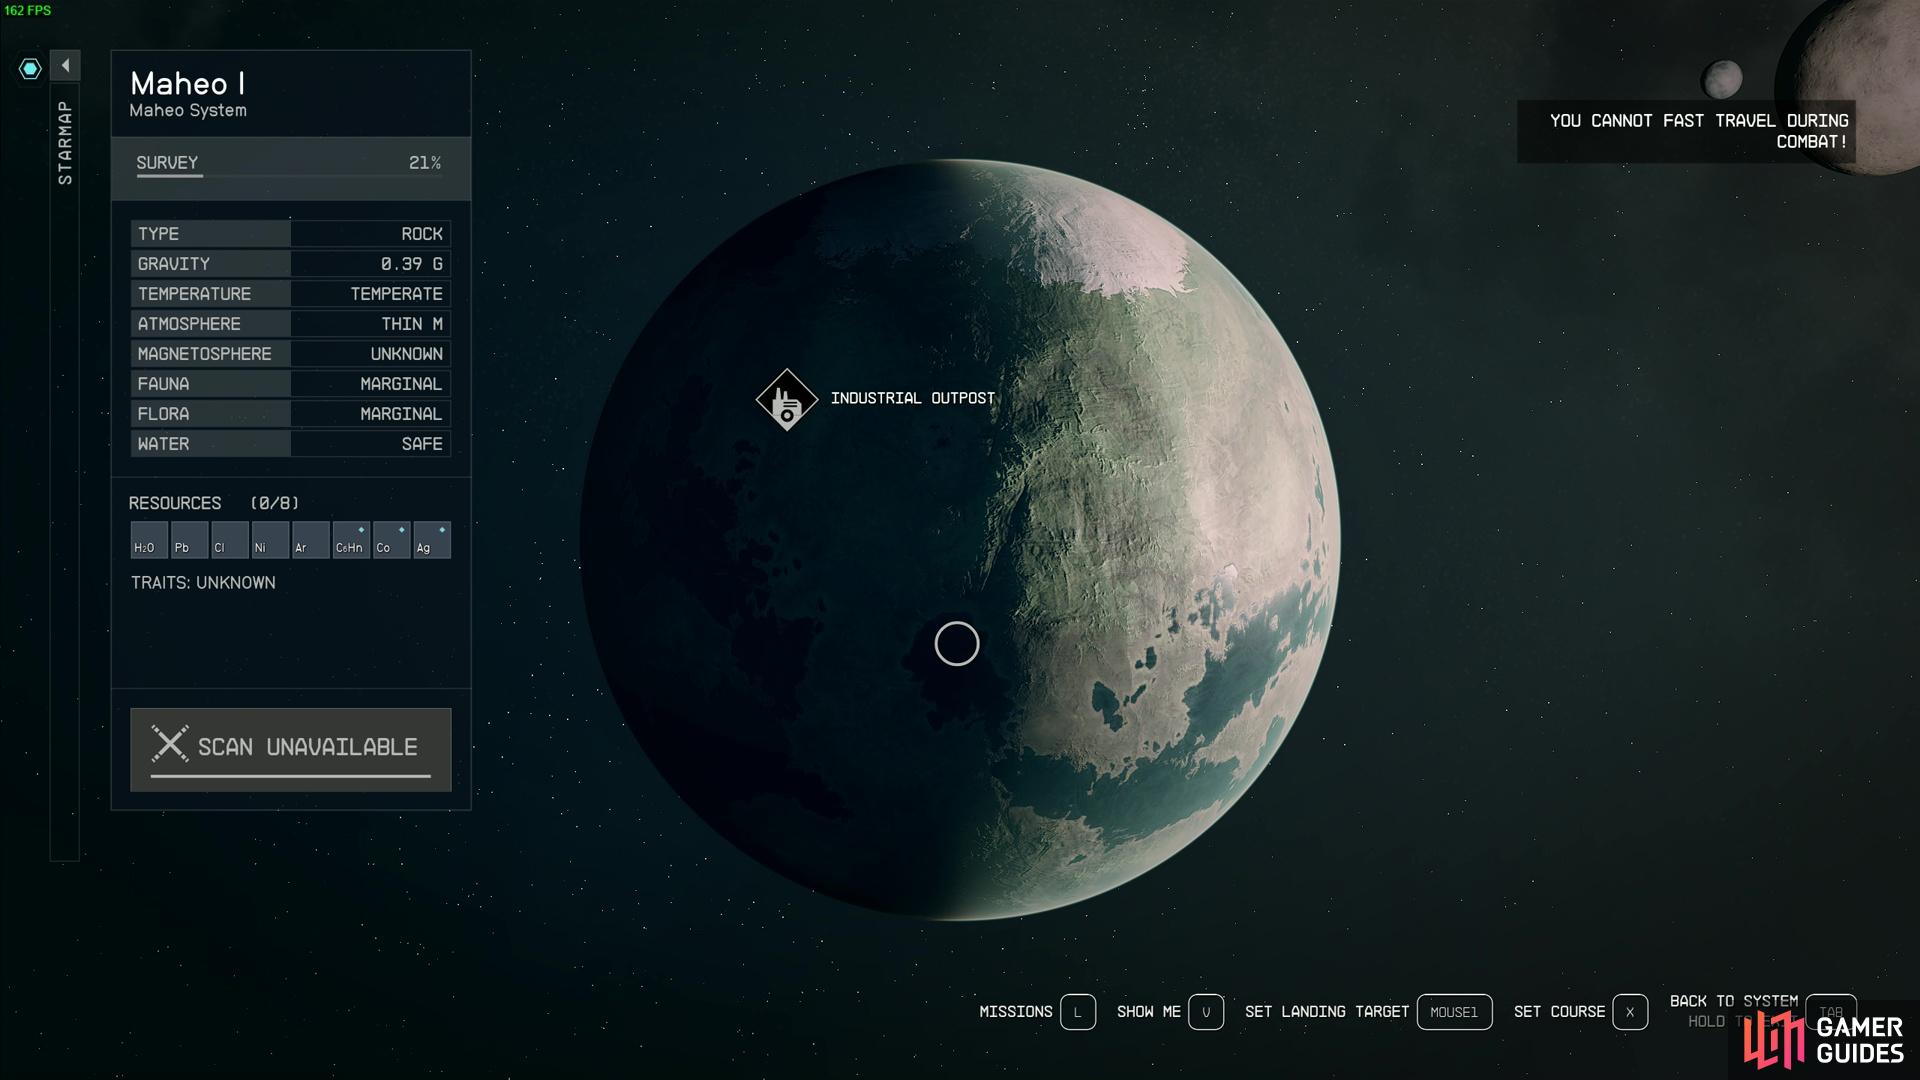 You cannot grav jump to another planet in the same system in Starfield's ship combat, as evident by this screenshot and the notification in the top right.